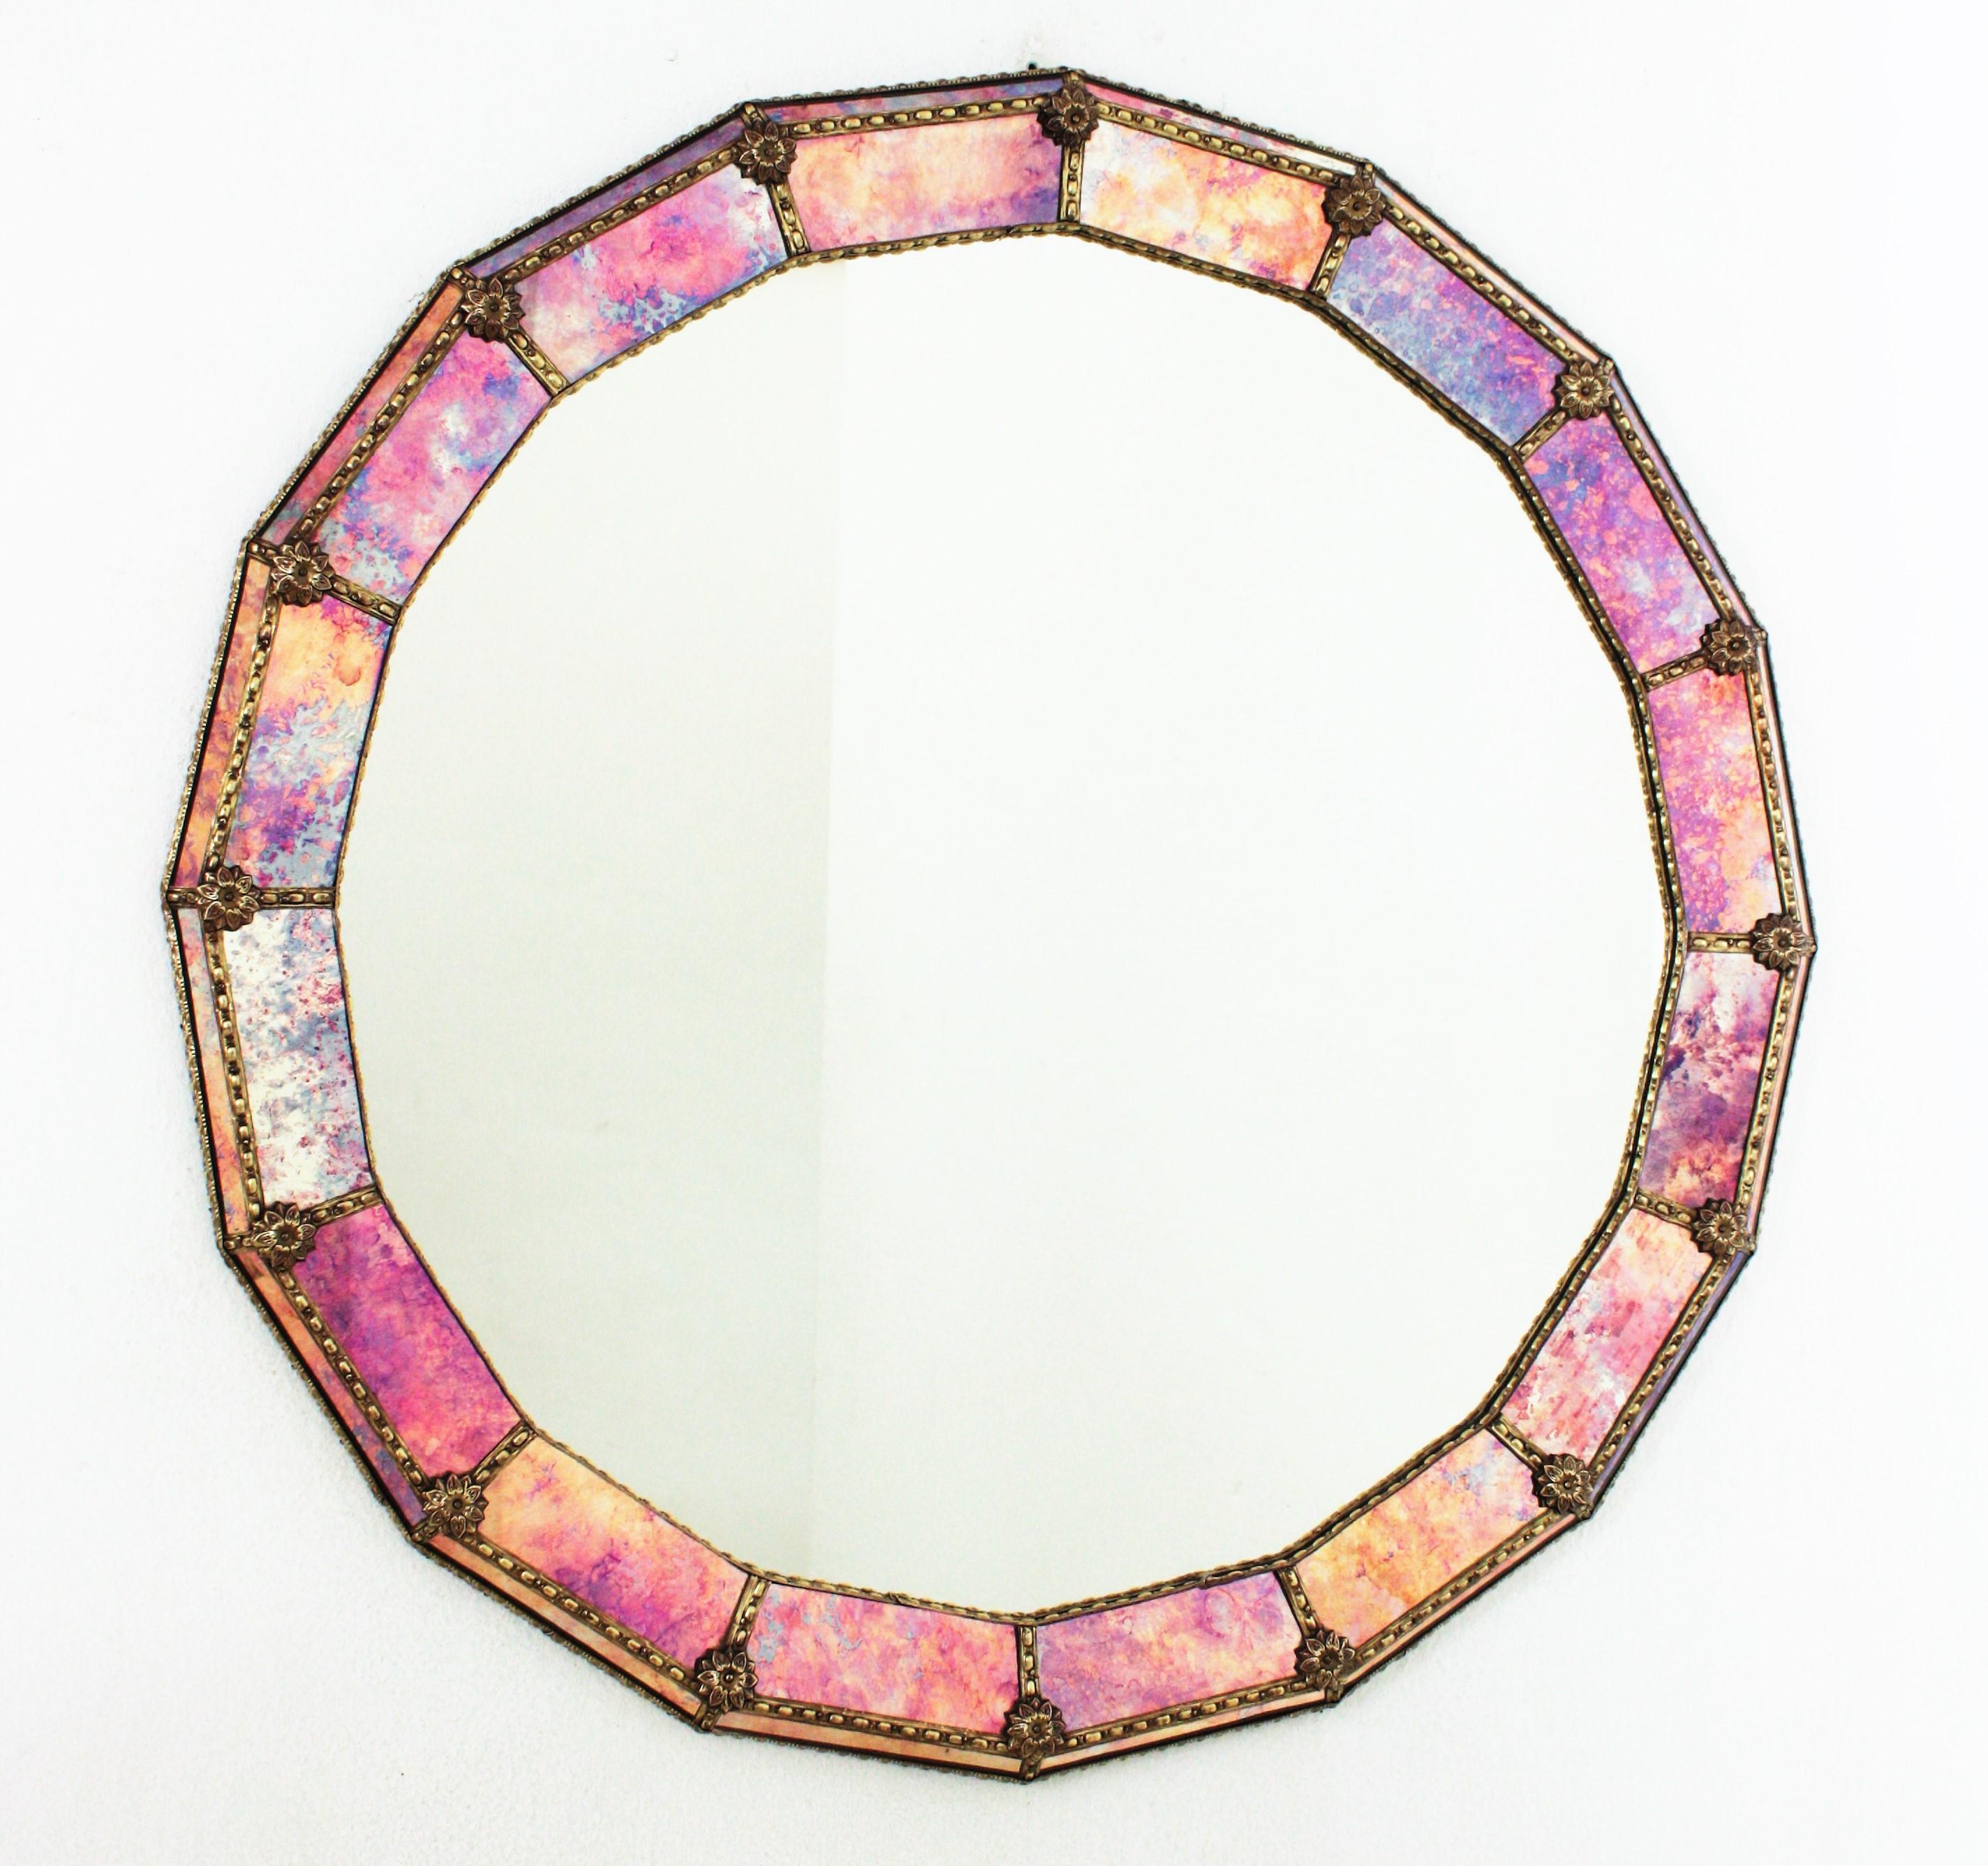 Colorful midcentury Large Round Polyhedral Venetian Mirror
Cool Venetian style Hollywood Regency round mirror with pink purple amber iridiscent mirror glass panels. Spain, 1950s
This glamorous mirror featuring a double layered mirror frame made of